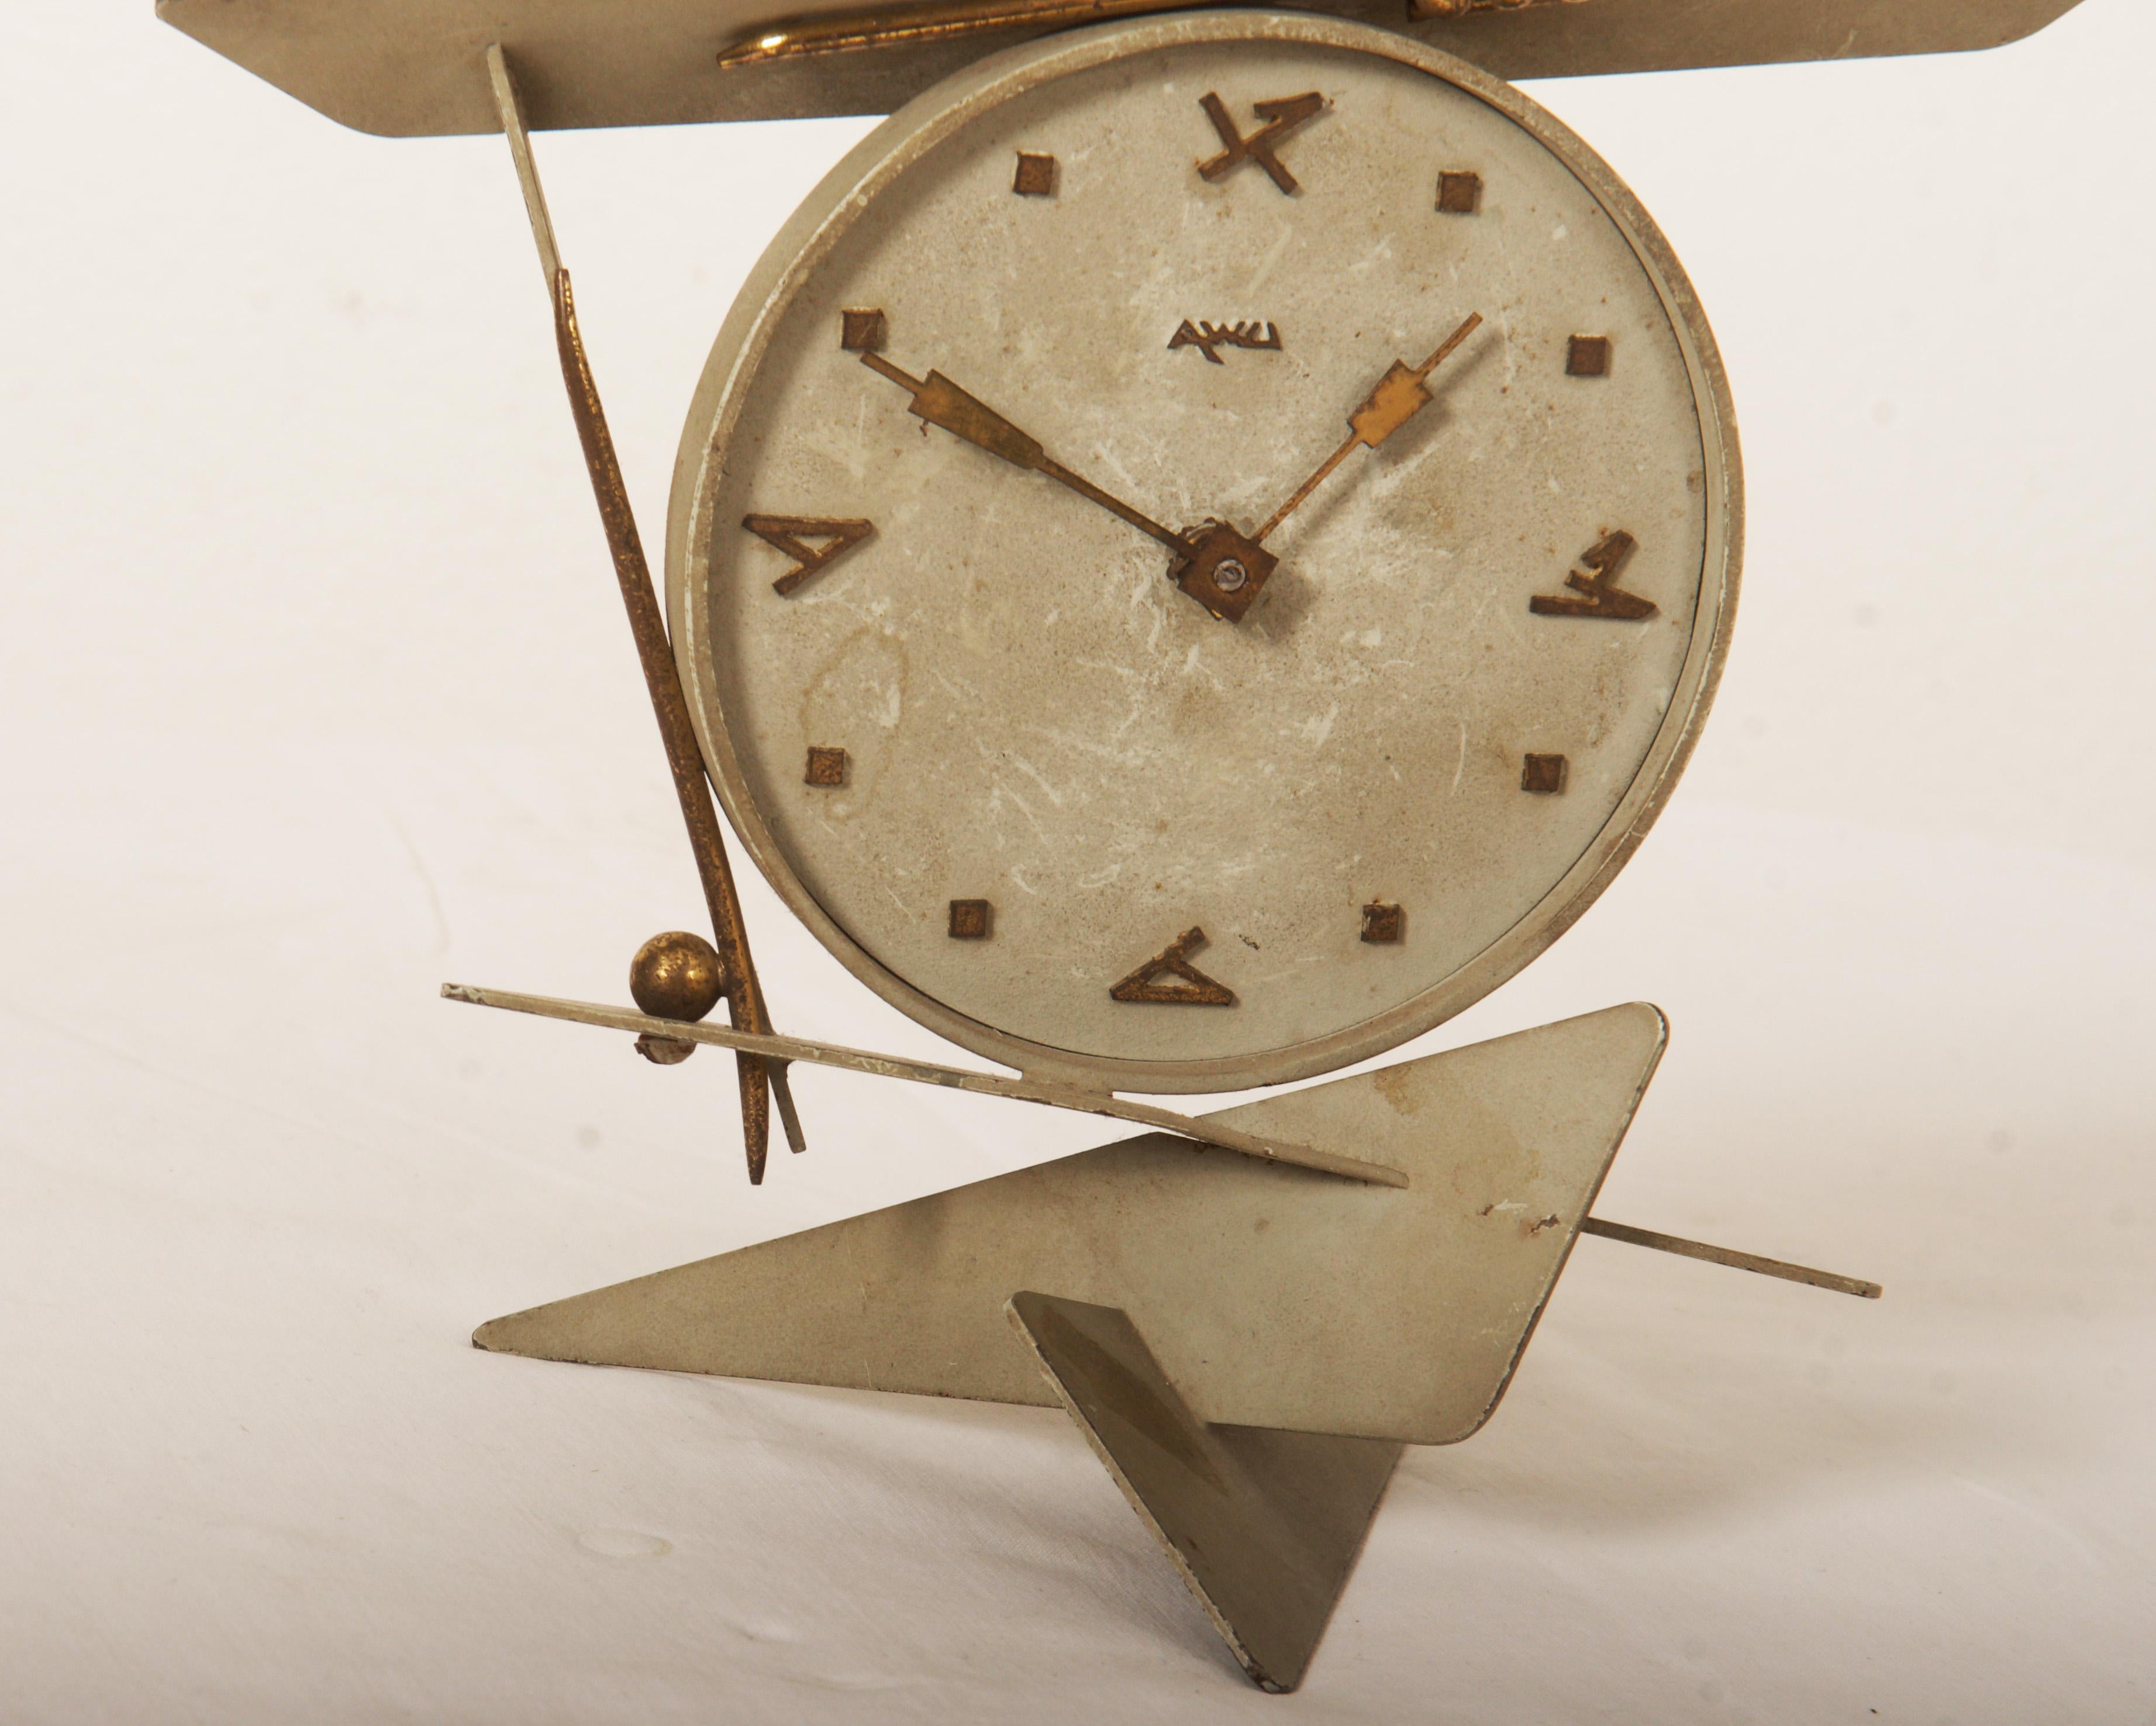 Bauhaus Adrianus Willem Aad Uithol - AWU Table Clock In Fair Condition For Sale In Vienna, AT